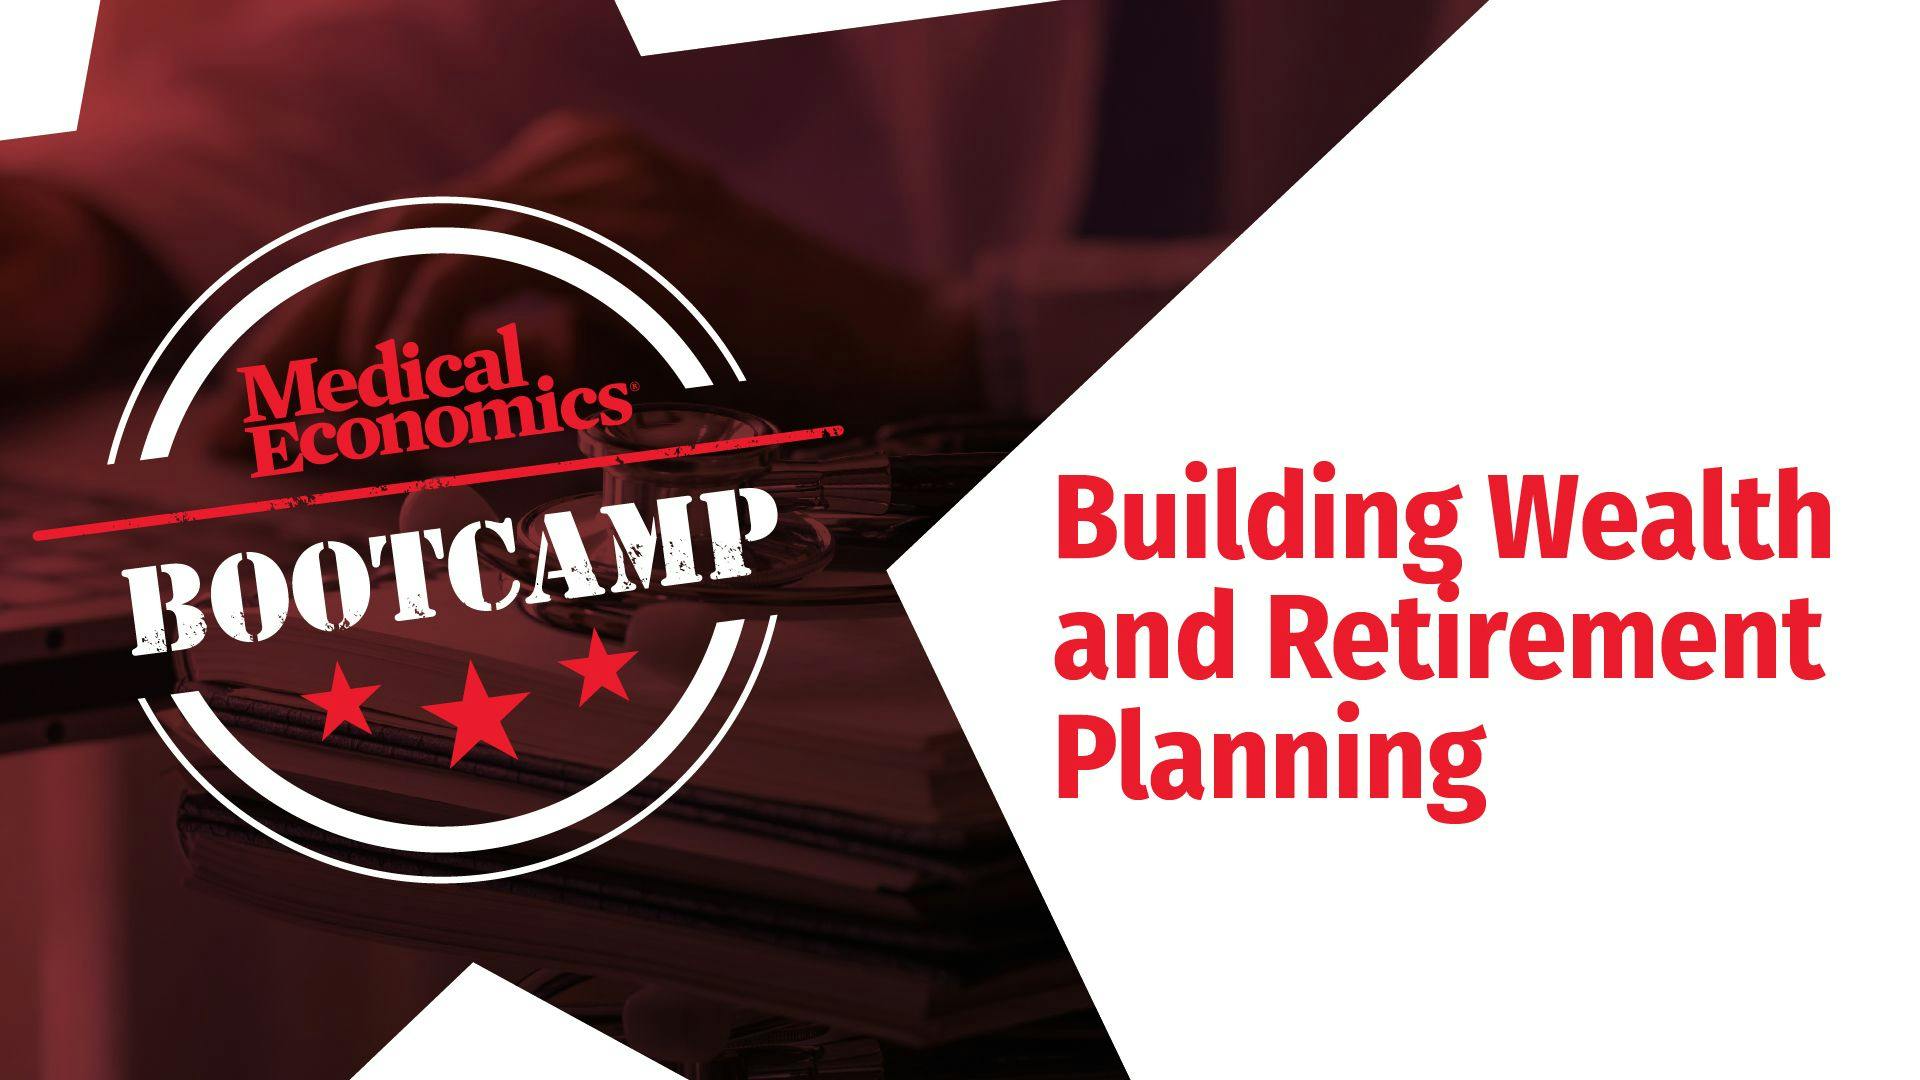 Session 9: Earning Your Stripes: Wealth Building and Retirement Planning